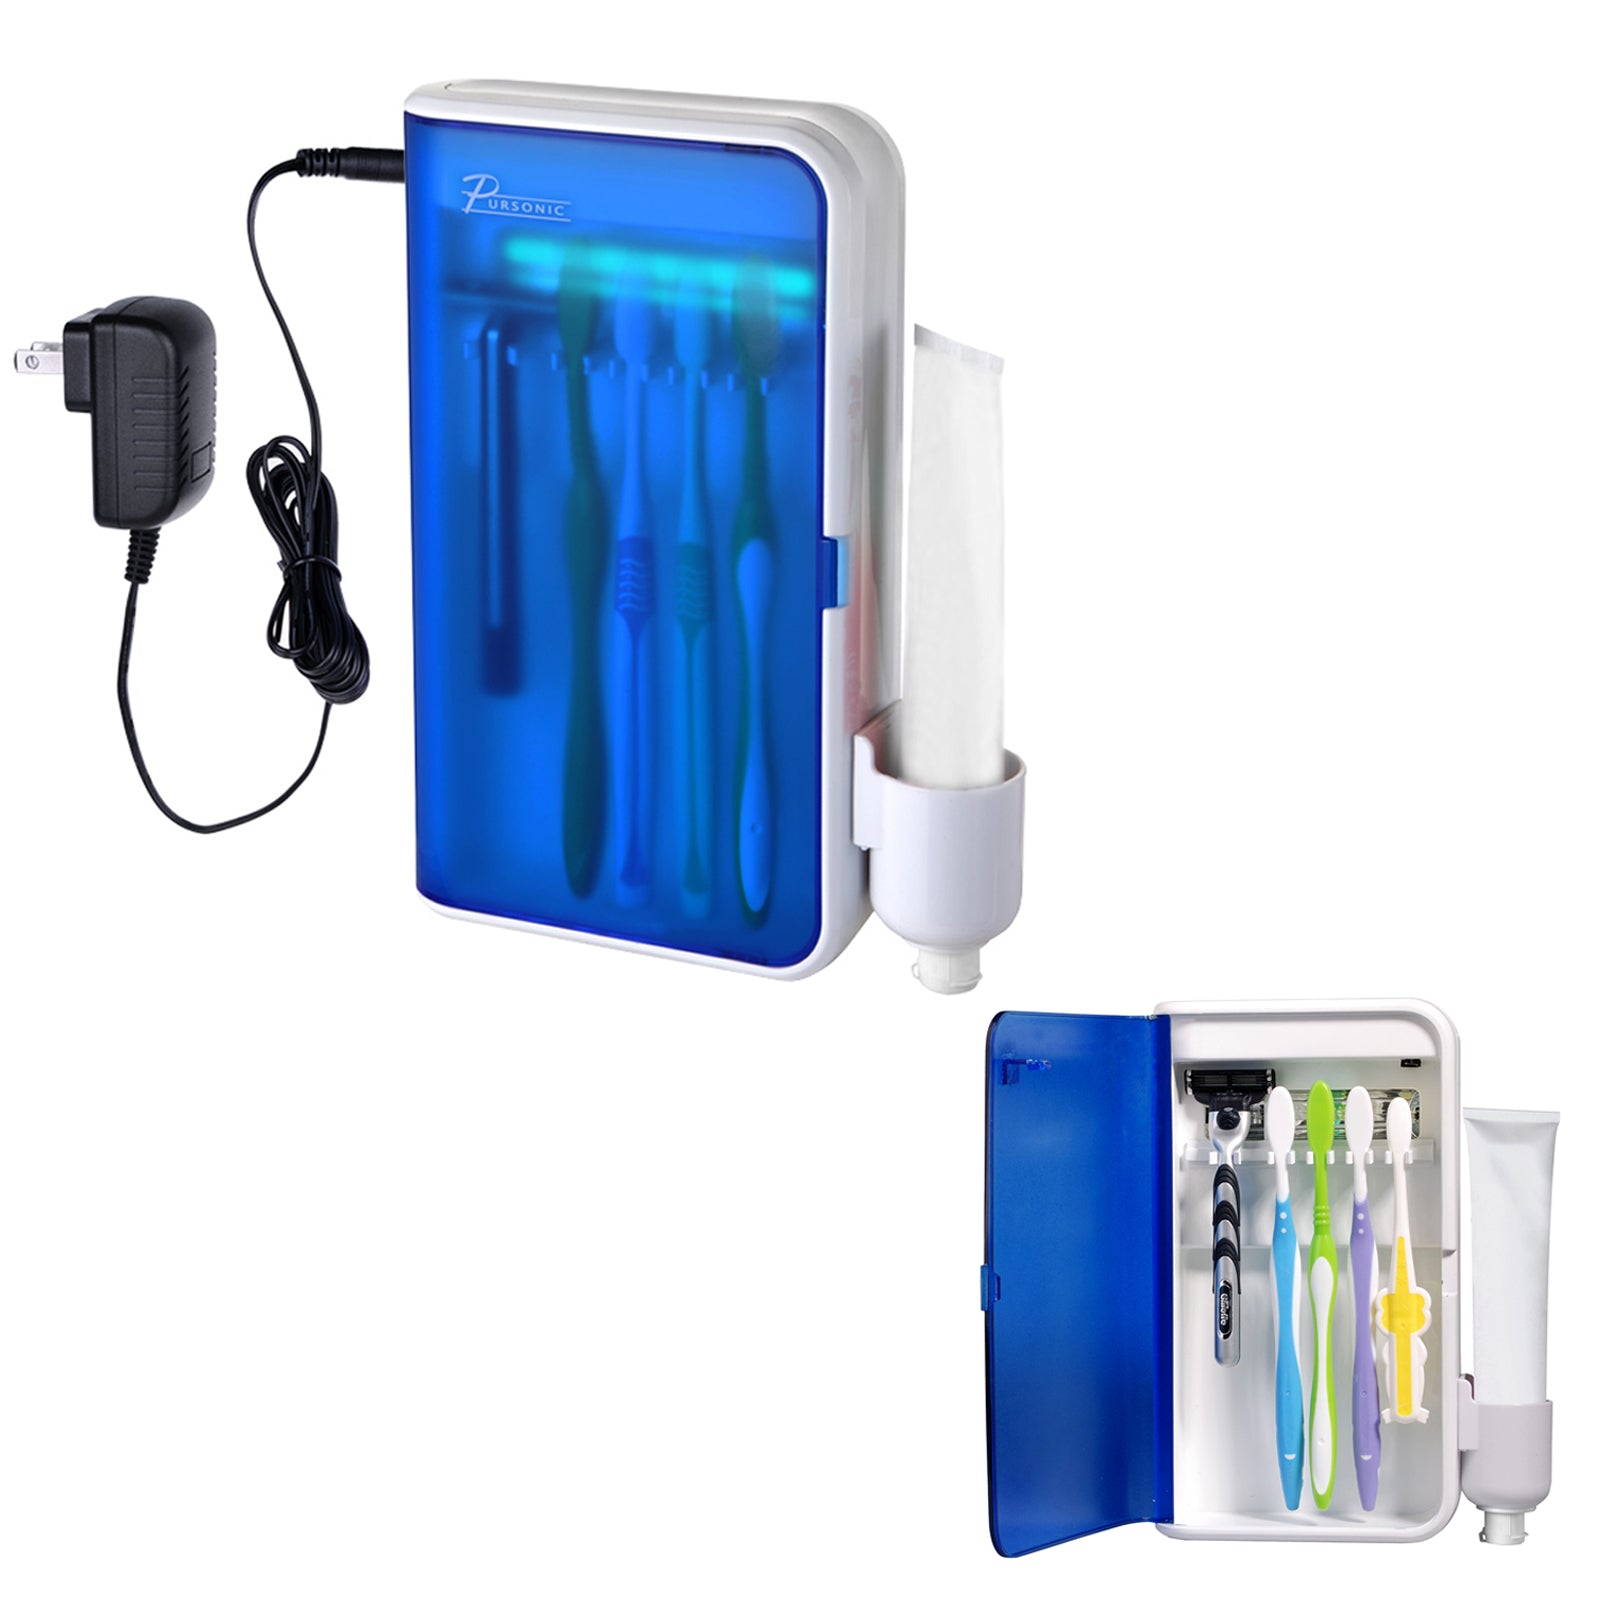 Pursonic UV Ultraviolet Family Toothbrush Sanitizer Sterilizer Cleaner with AC Adapter FSSA Global B